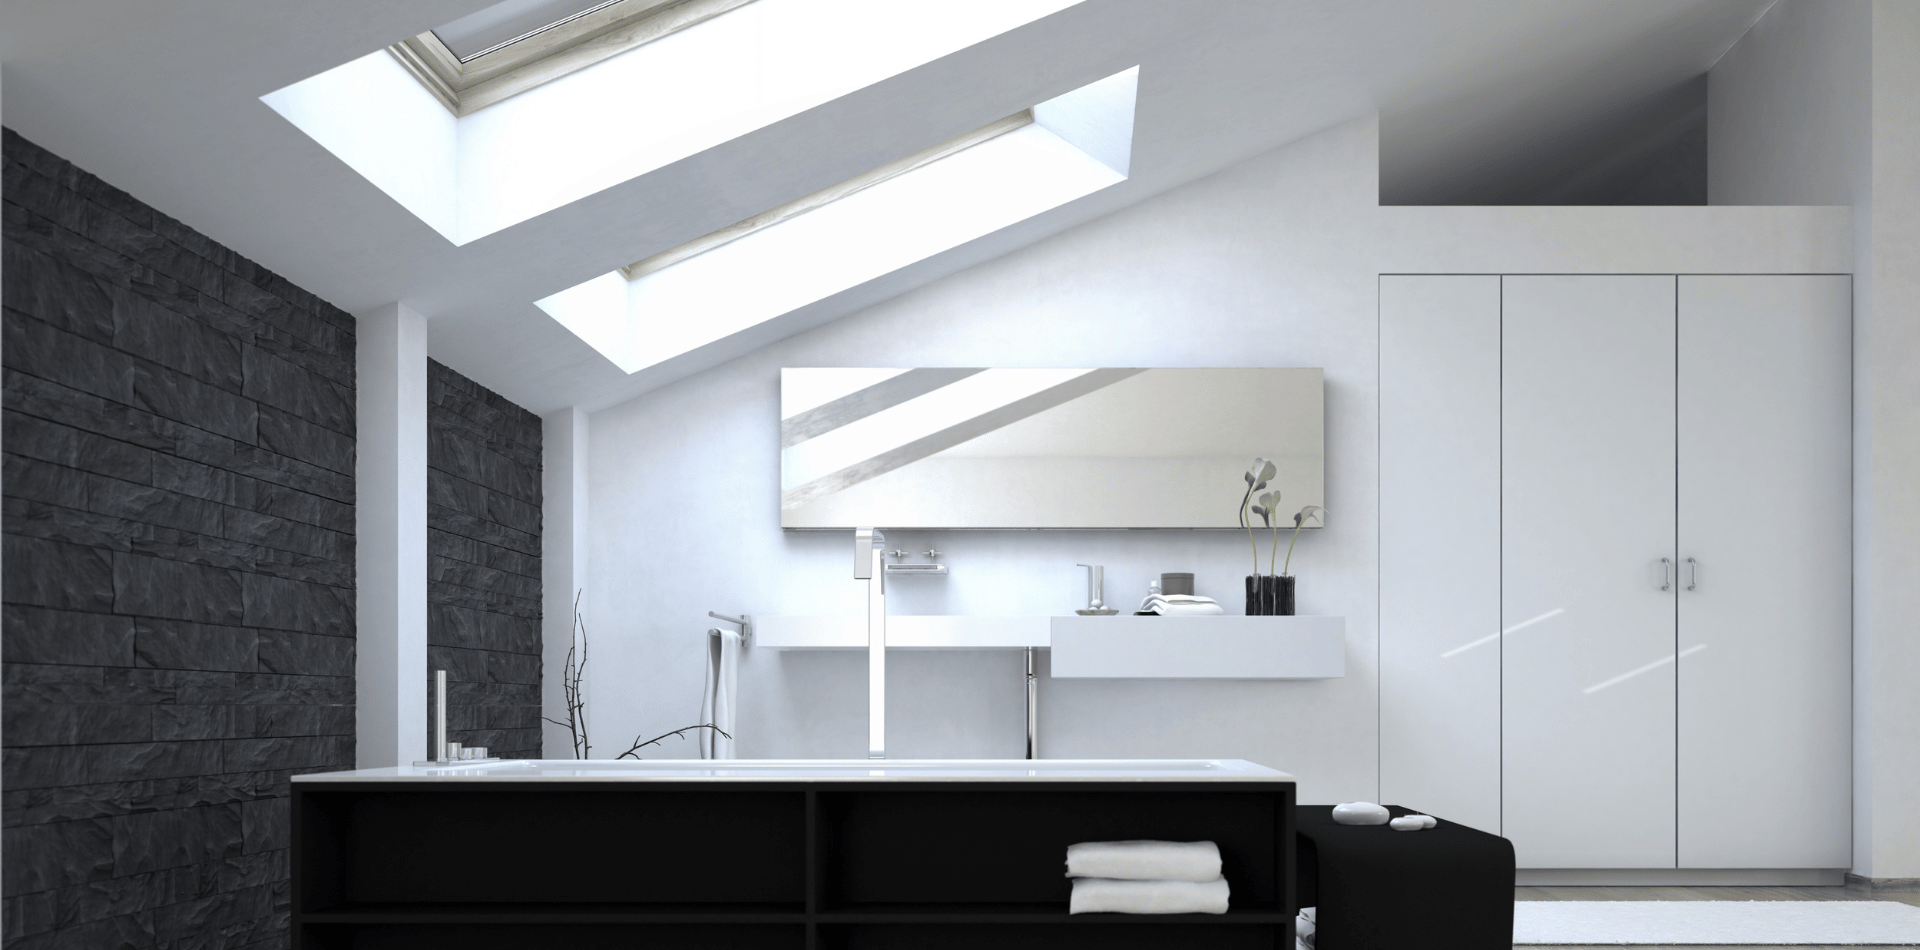 skylight in a kitchen